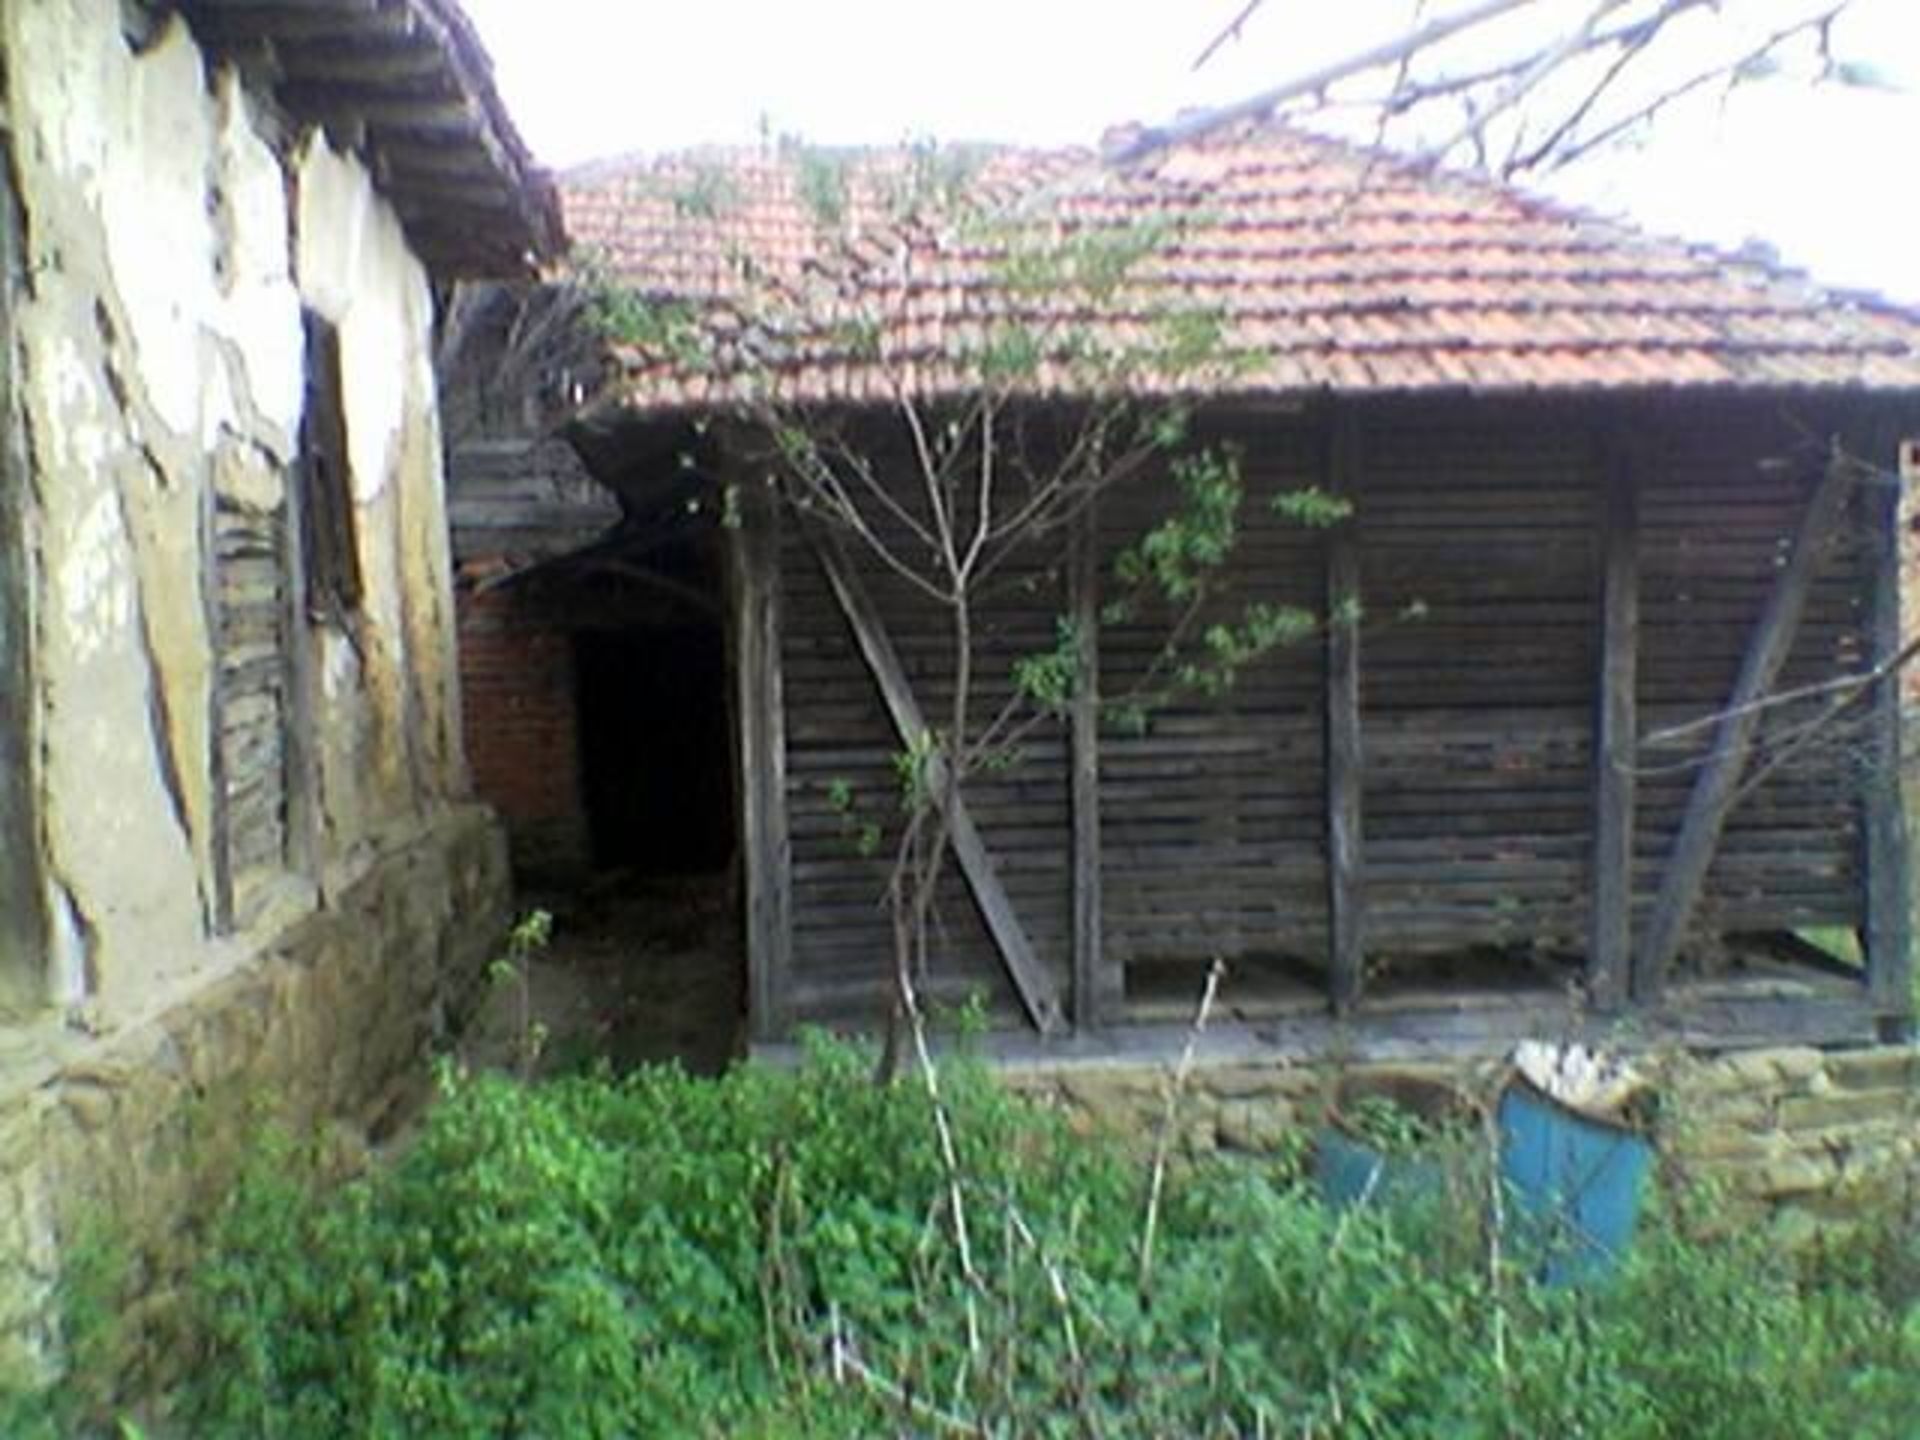 VALCHEK, VIDIN, BULGARIA FREEHOLD HOUSE 1/3 ACRE WITH DEEDS - Image 5 of 9